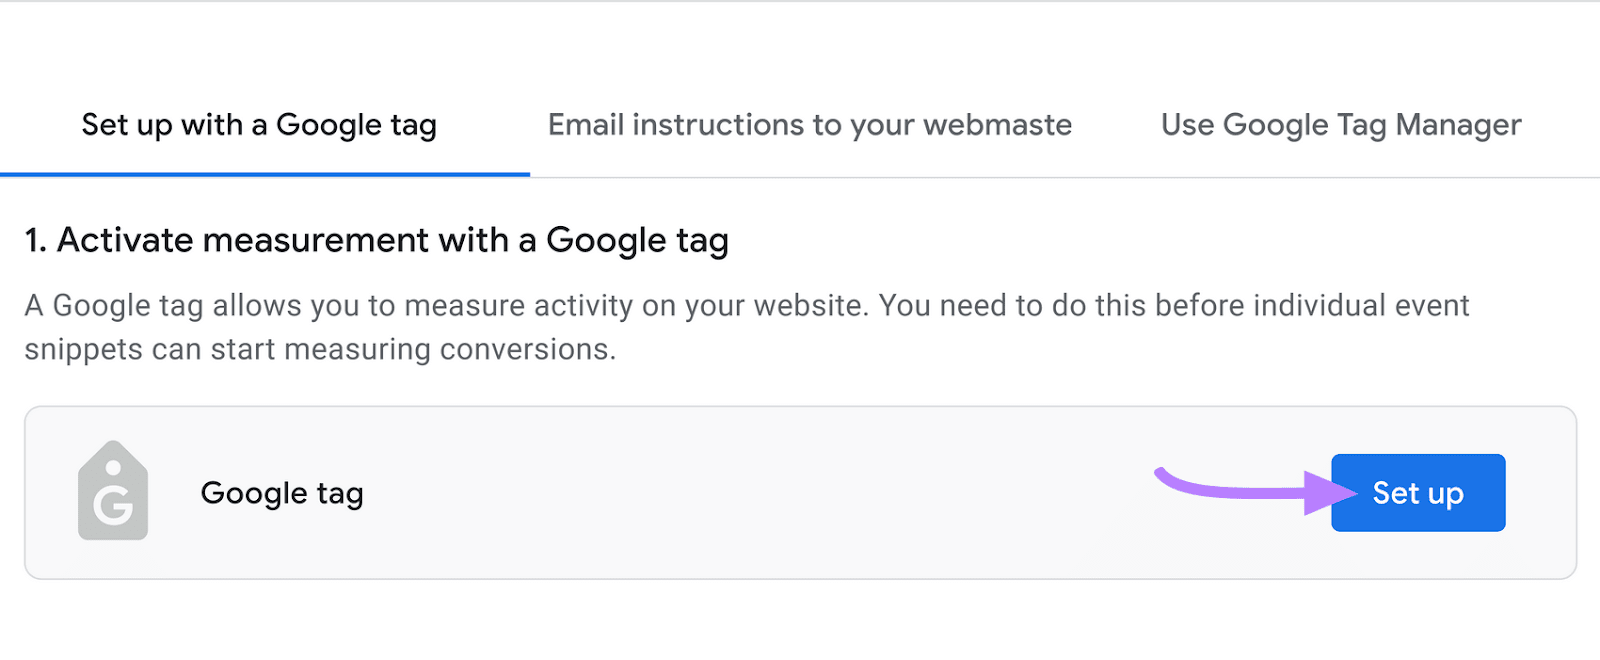 “Set up with a Google tag” tab